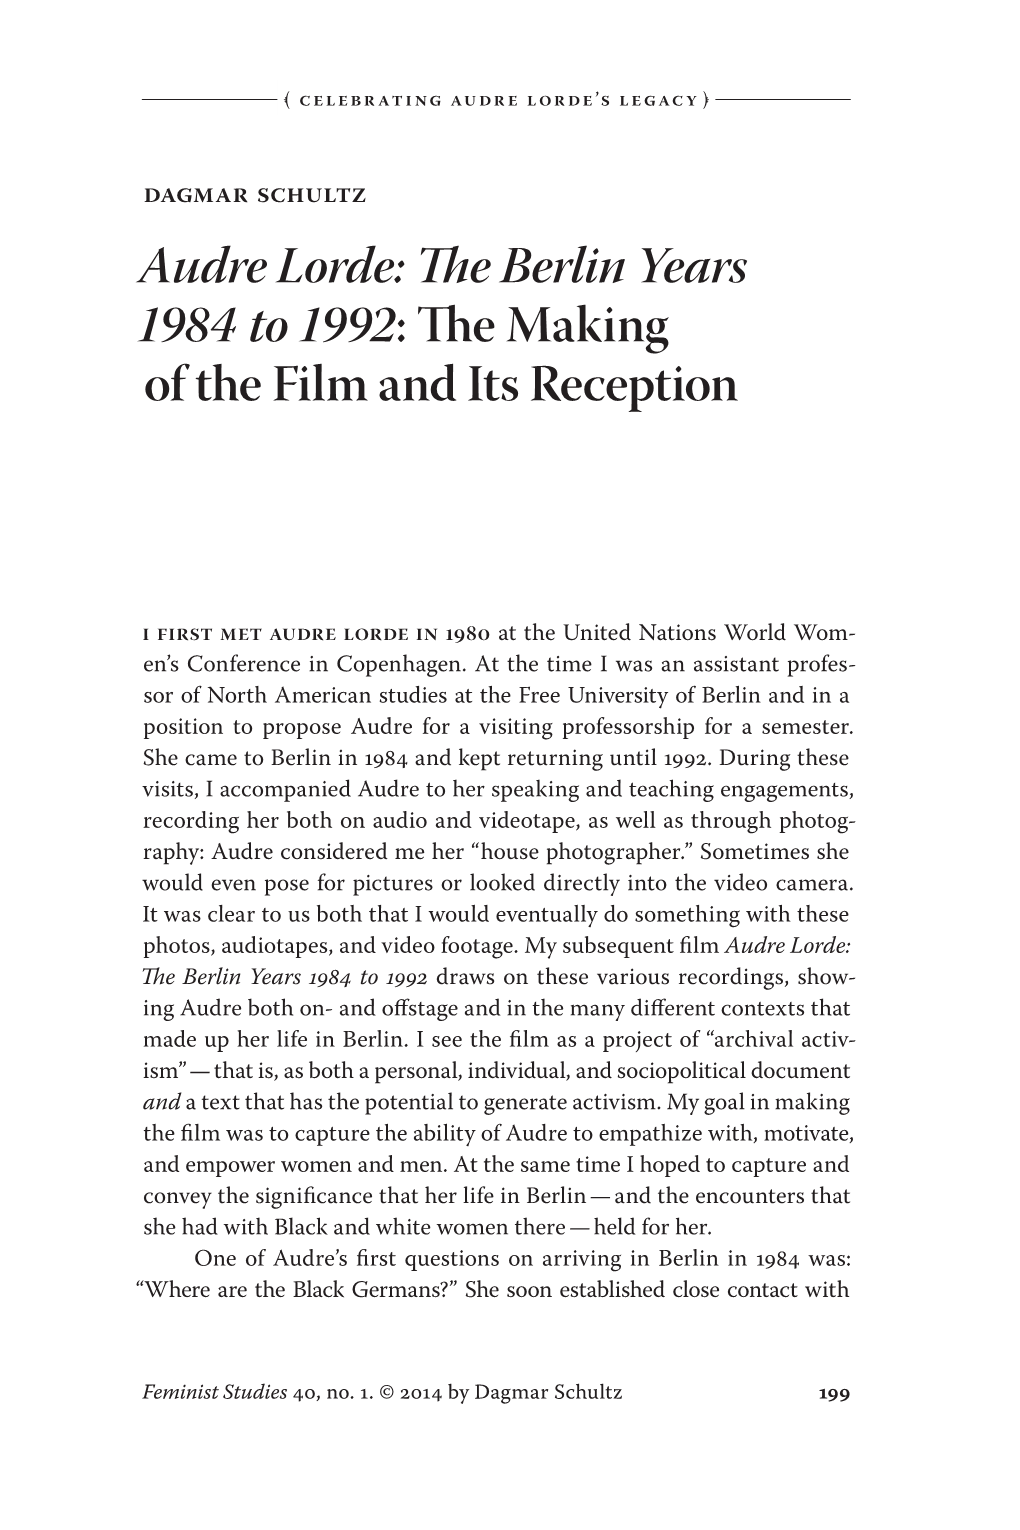 Audre Lorde: the Berlin Years 1984 to 1992: the Making of the Film and Its Reception